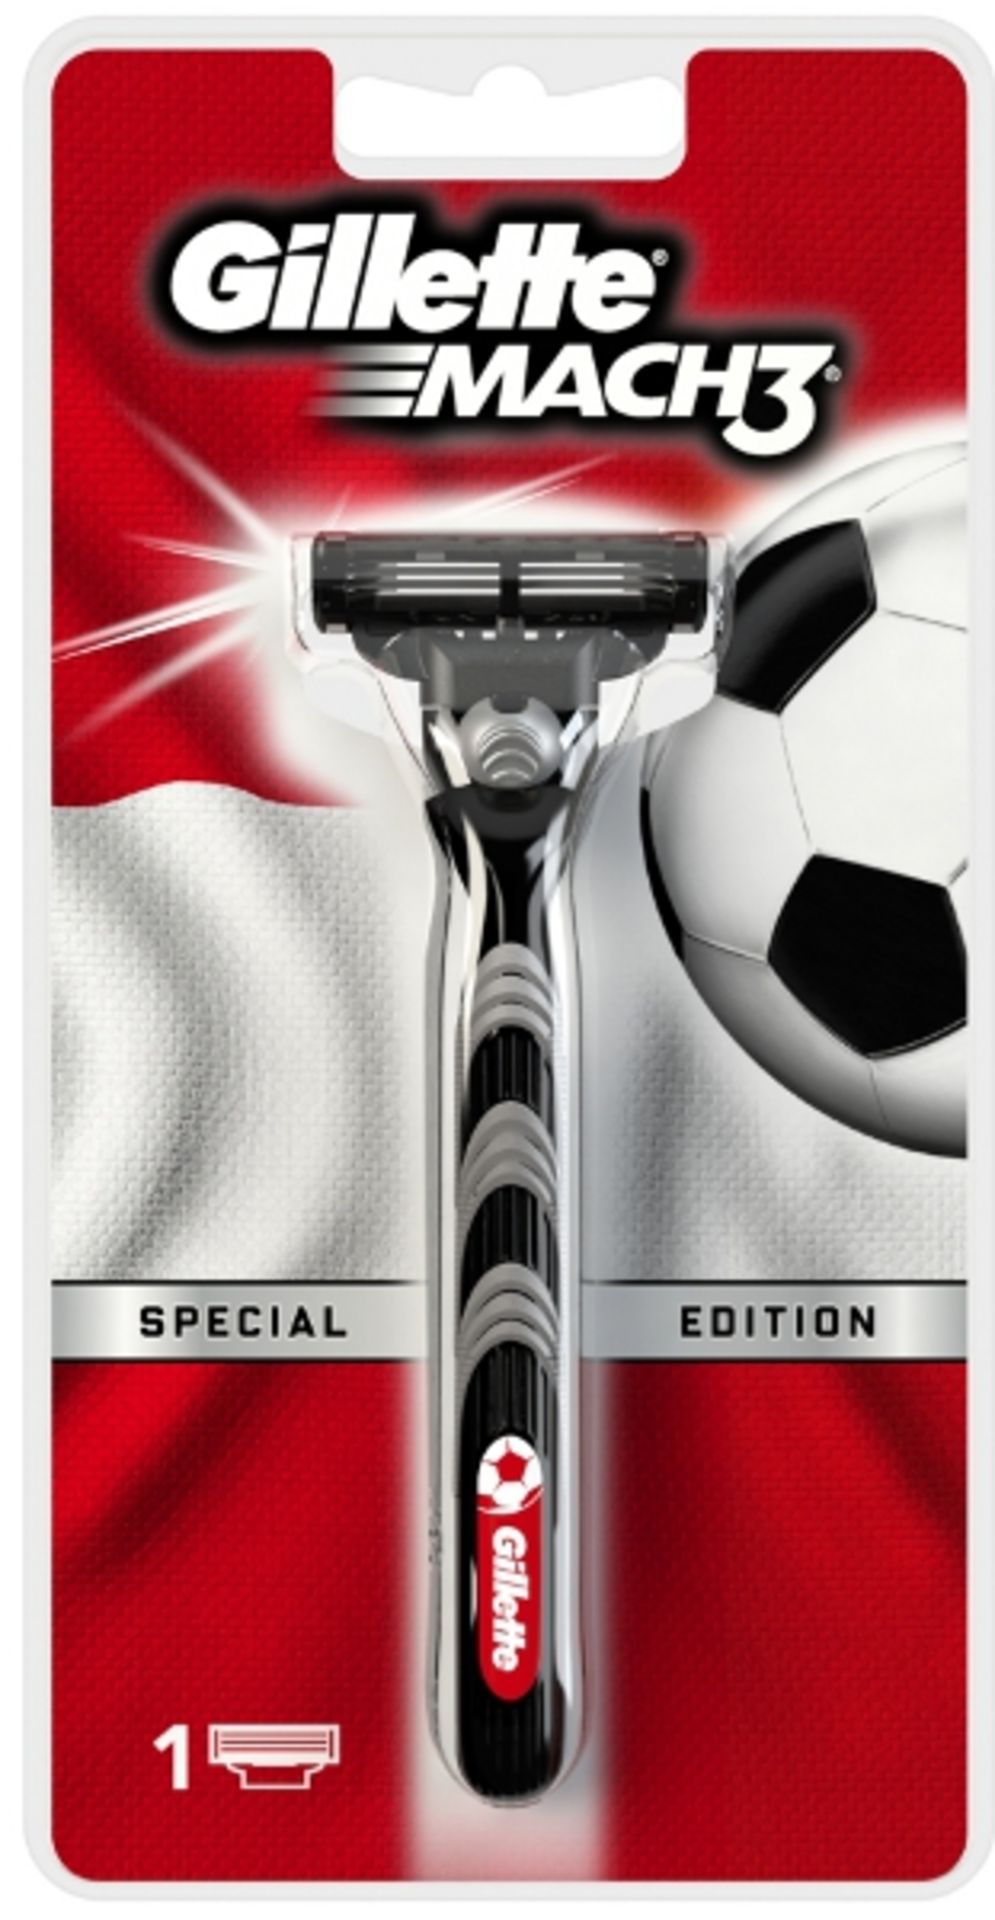 V Brand New Gillette Mach3 Football Special Edition X 2 YOUR BID PRICE TO BE MULTIPLIED BY TWO